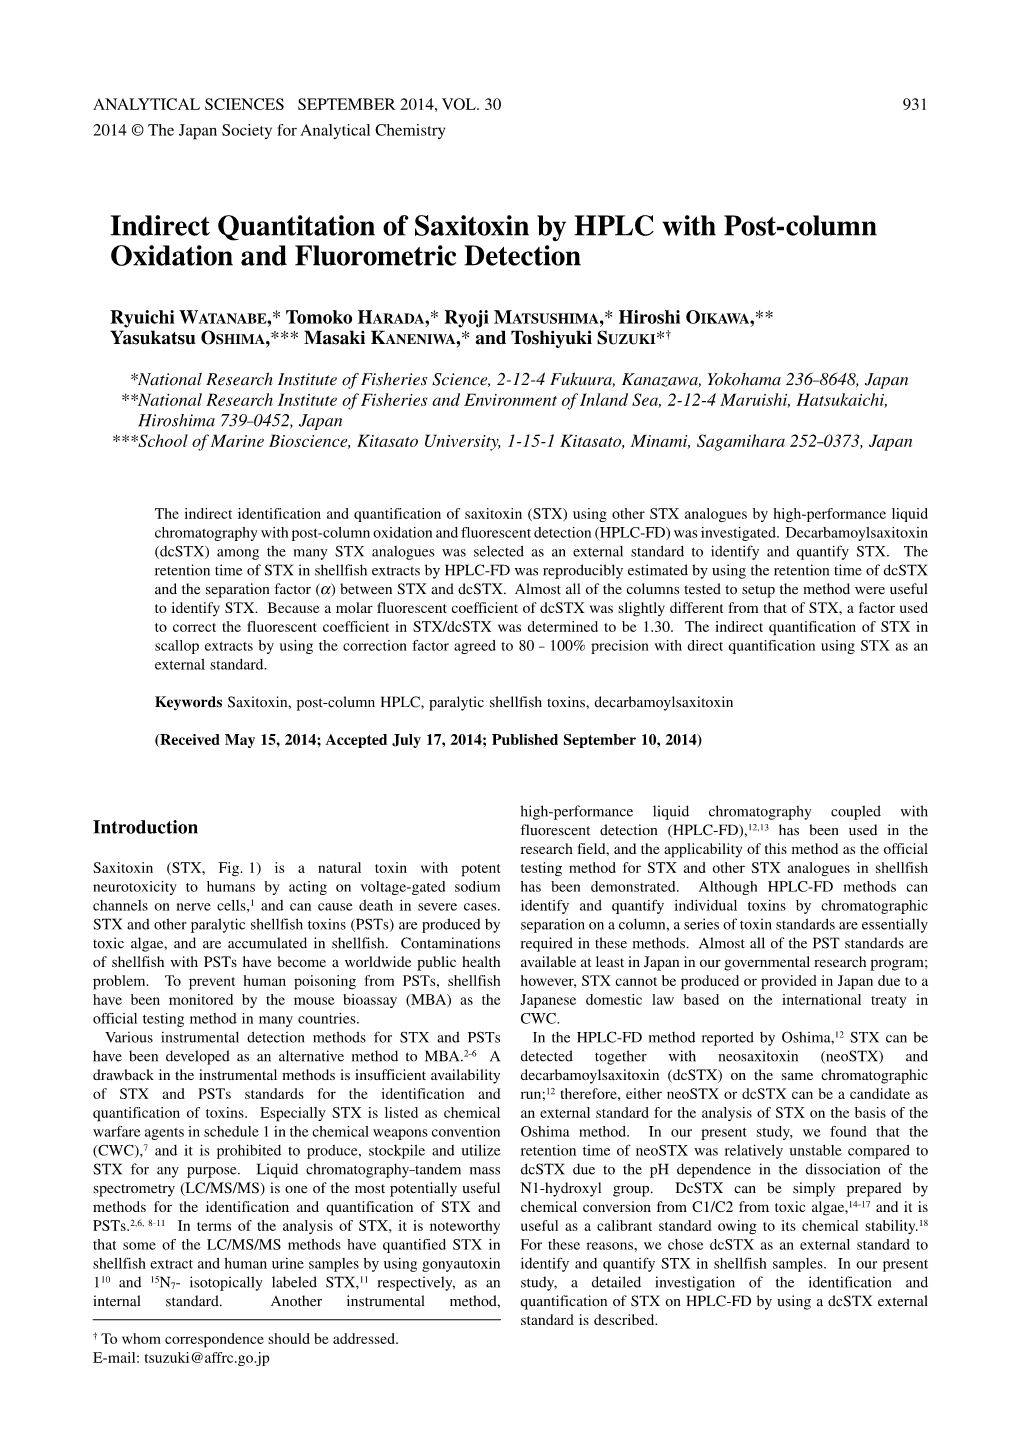 Indirect Quantitation of Saxitoxin by HPLC with Post-Column Oxidation and Fluorometric Detection